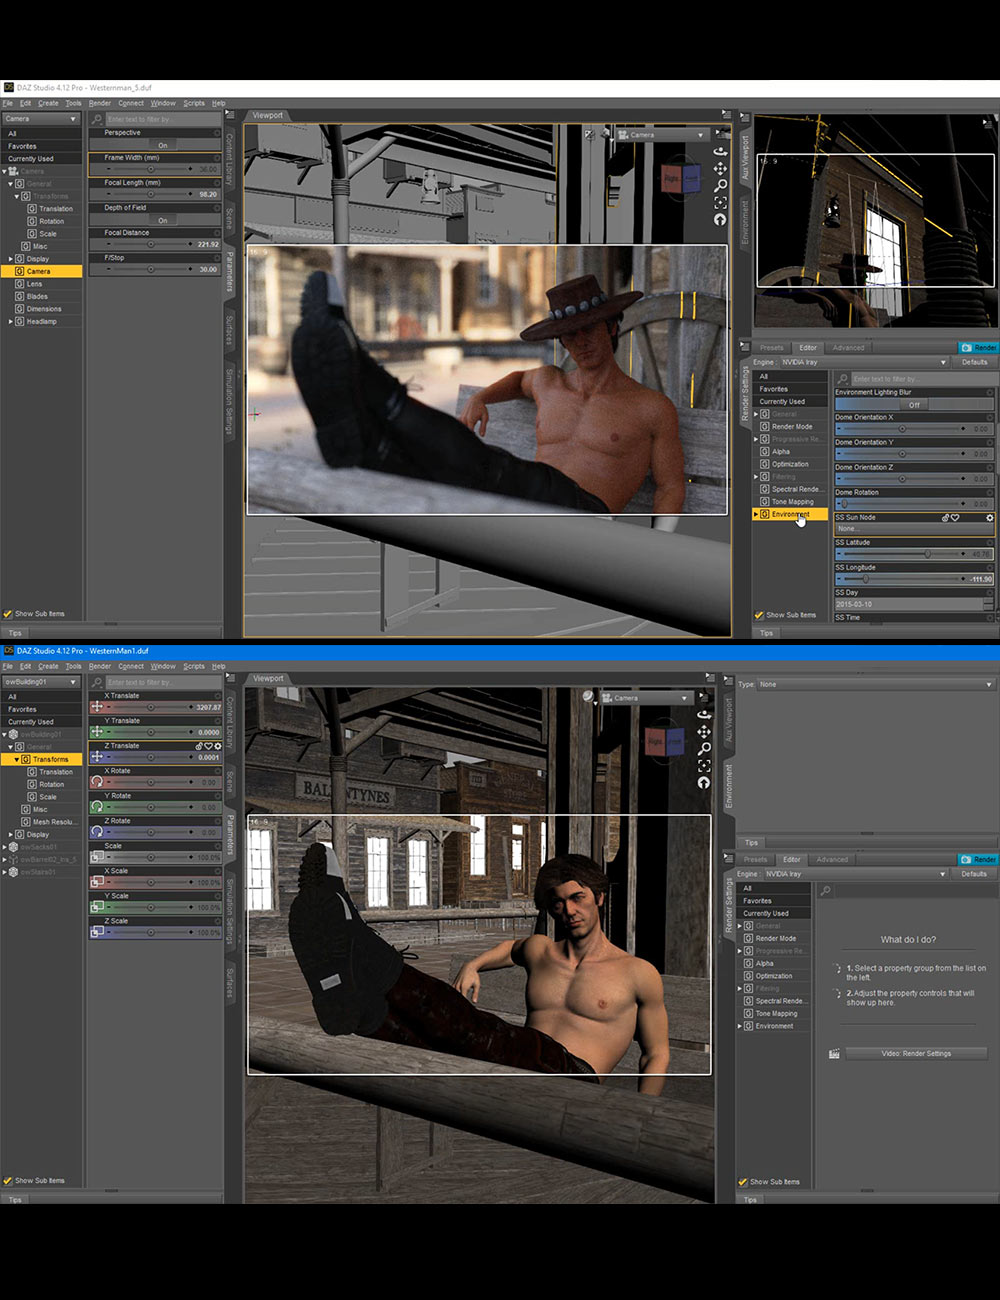 Making Of The Cowboy Photoshoot - Video Tutorial by: Dreamlight, 3D Models by Daz 3D